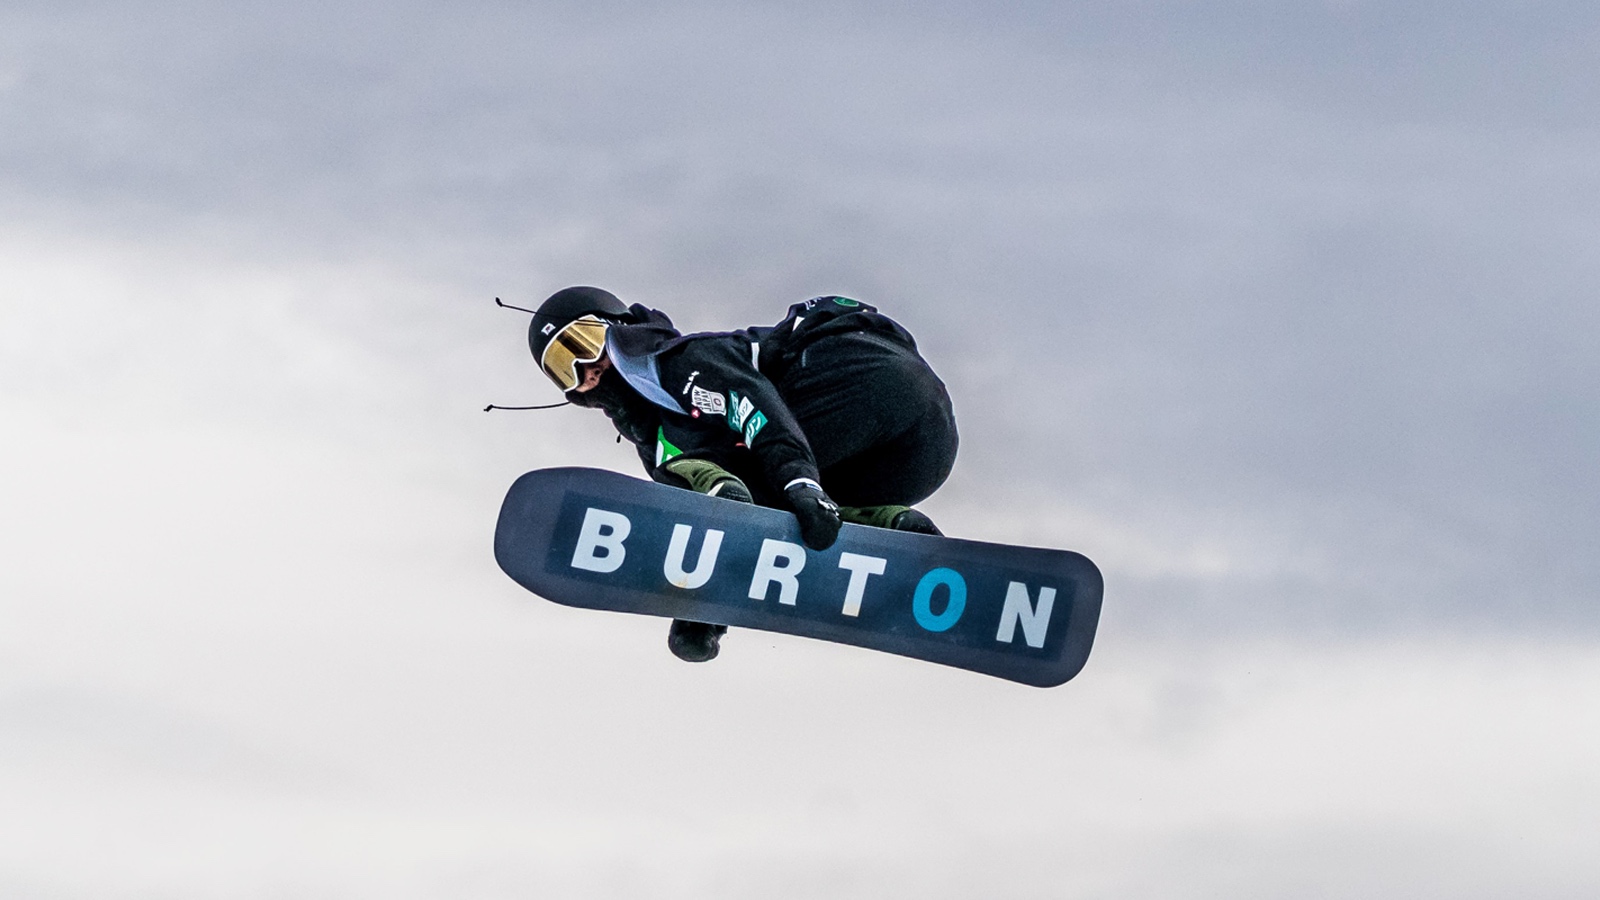 Burton Snowboards cancels online orders after cyber incident